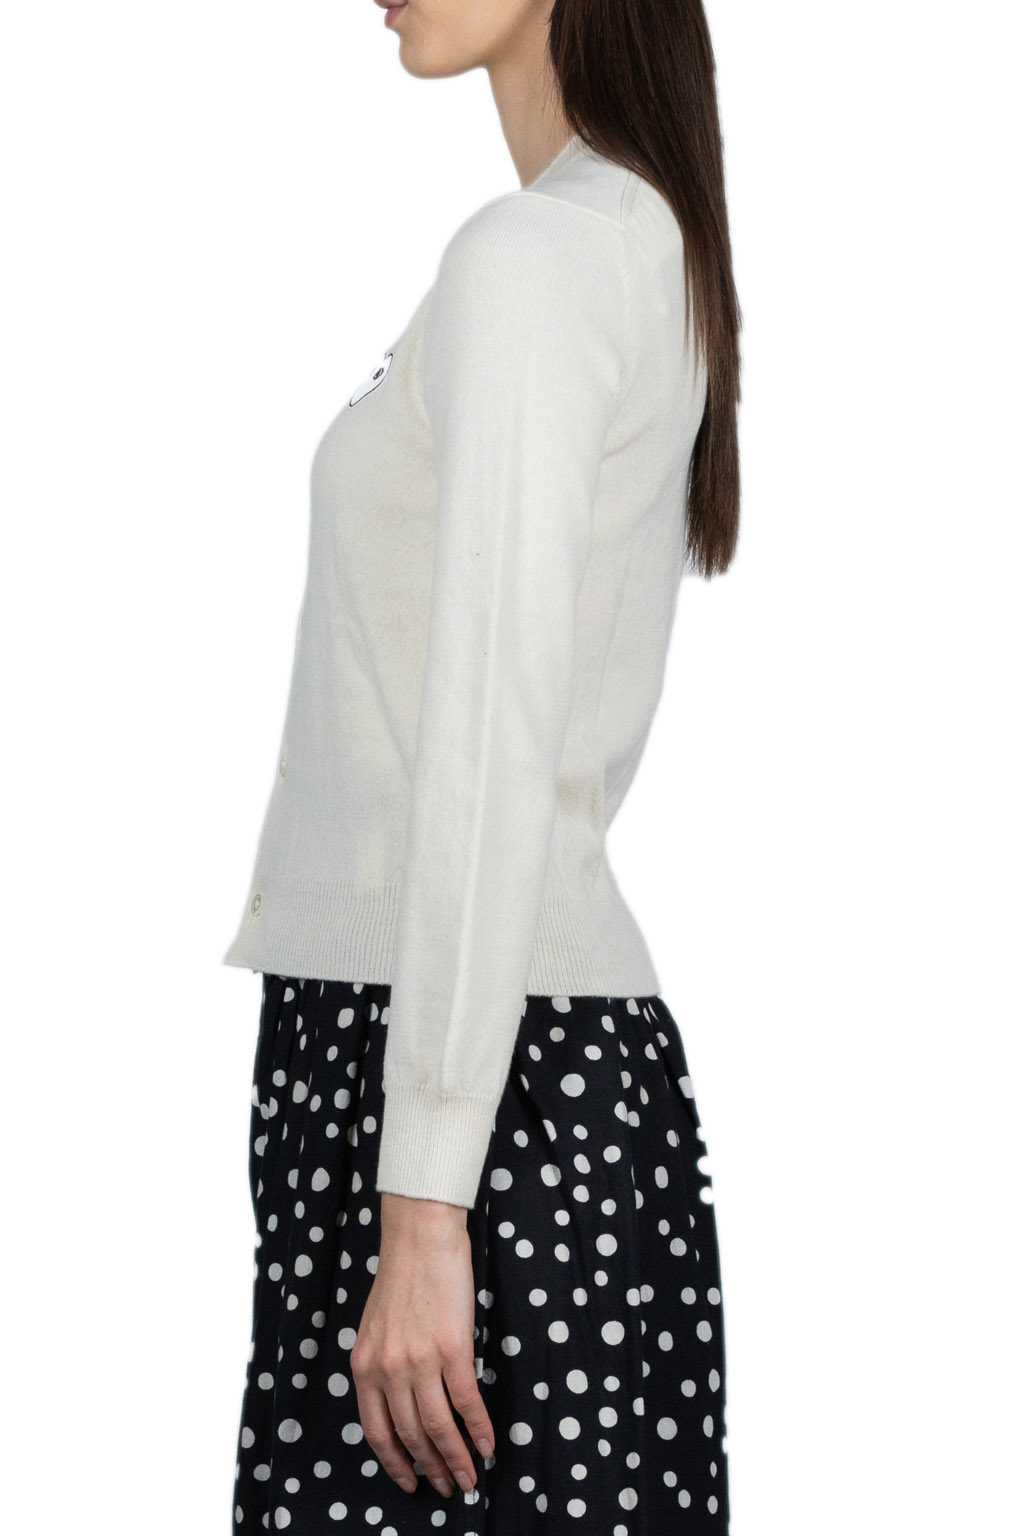 Comme Des Garcons Play White Heart Cardigan - Ivory